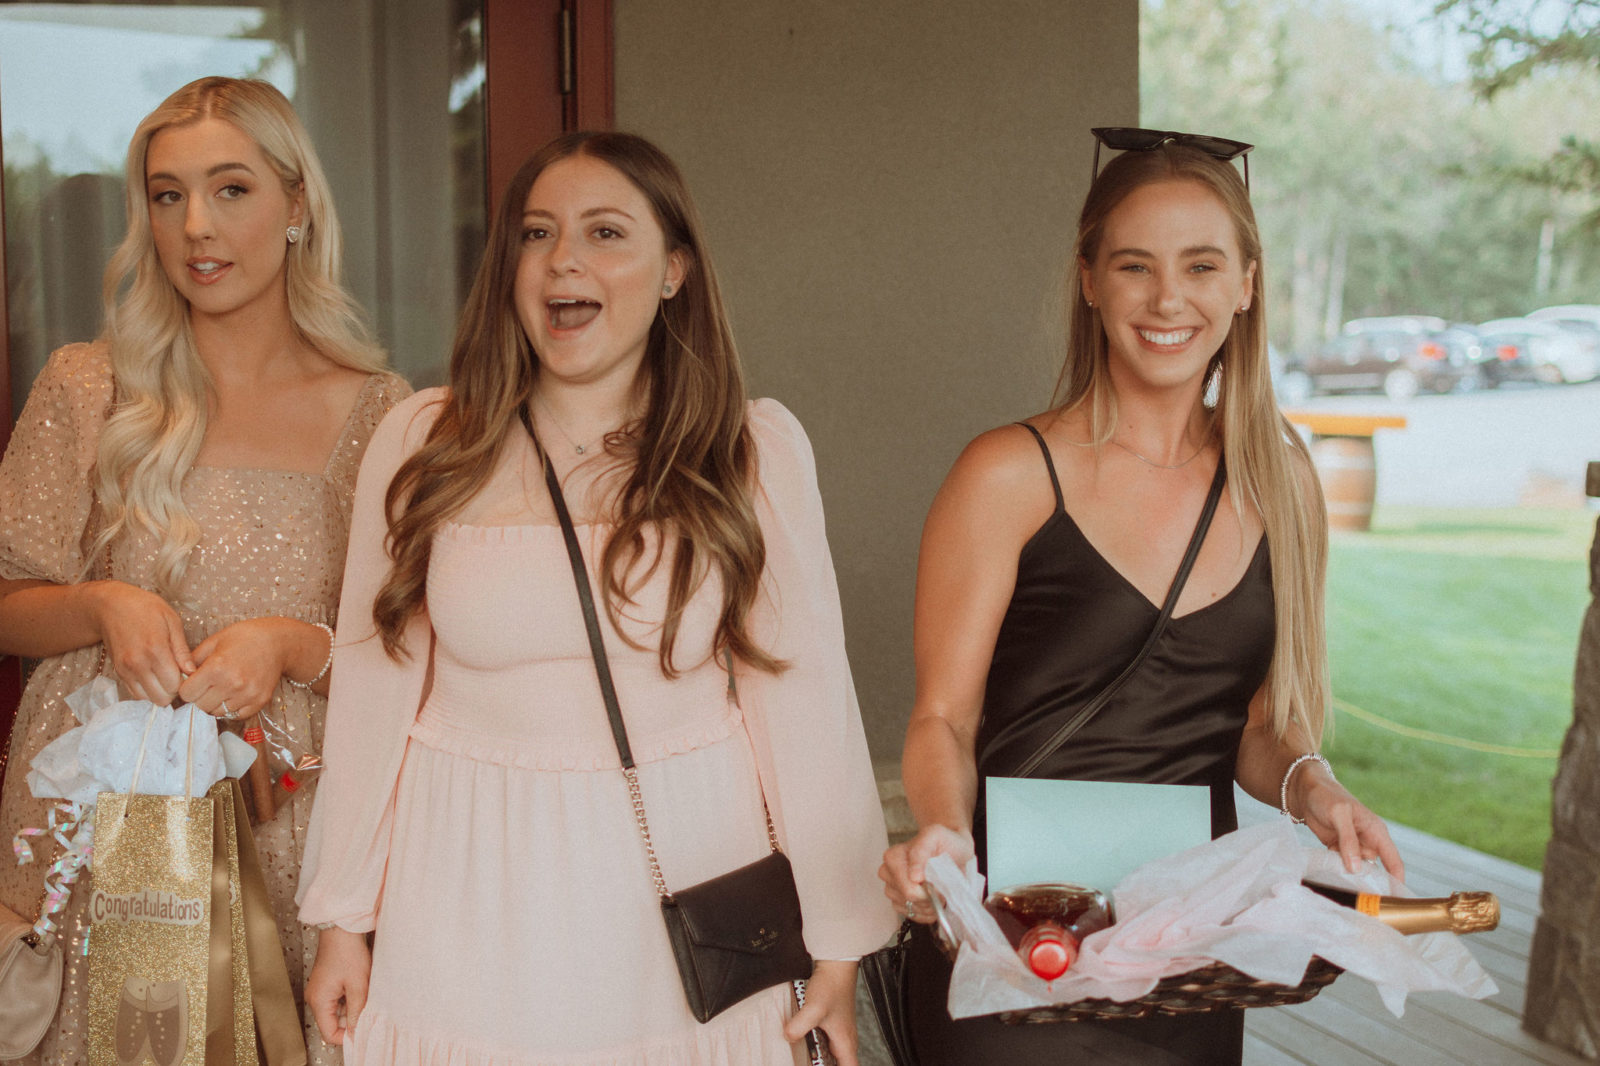 Guests shocked as they arrive at surprise wedding